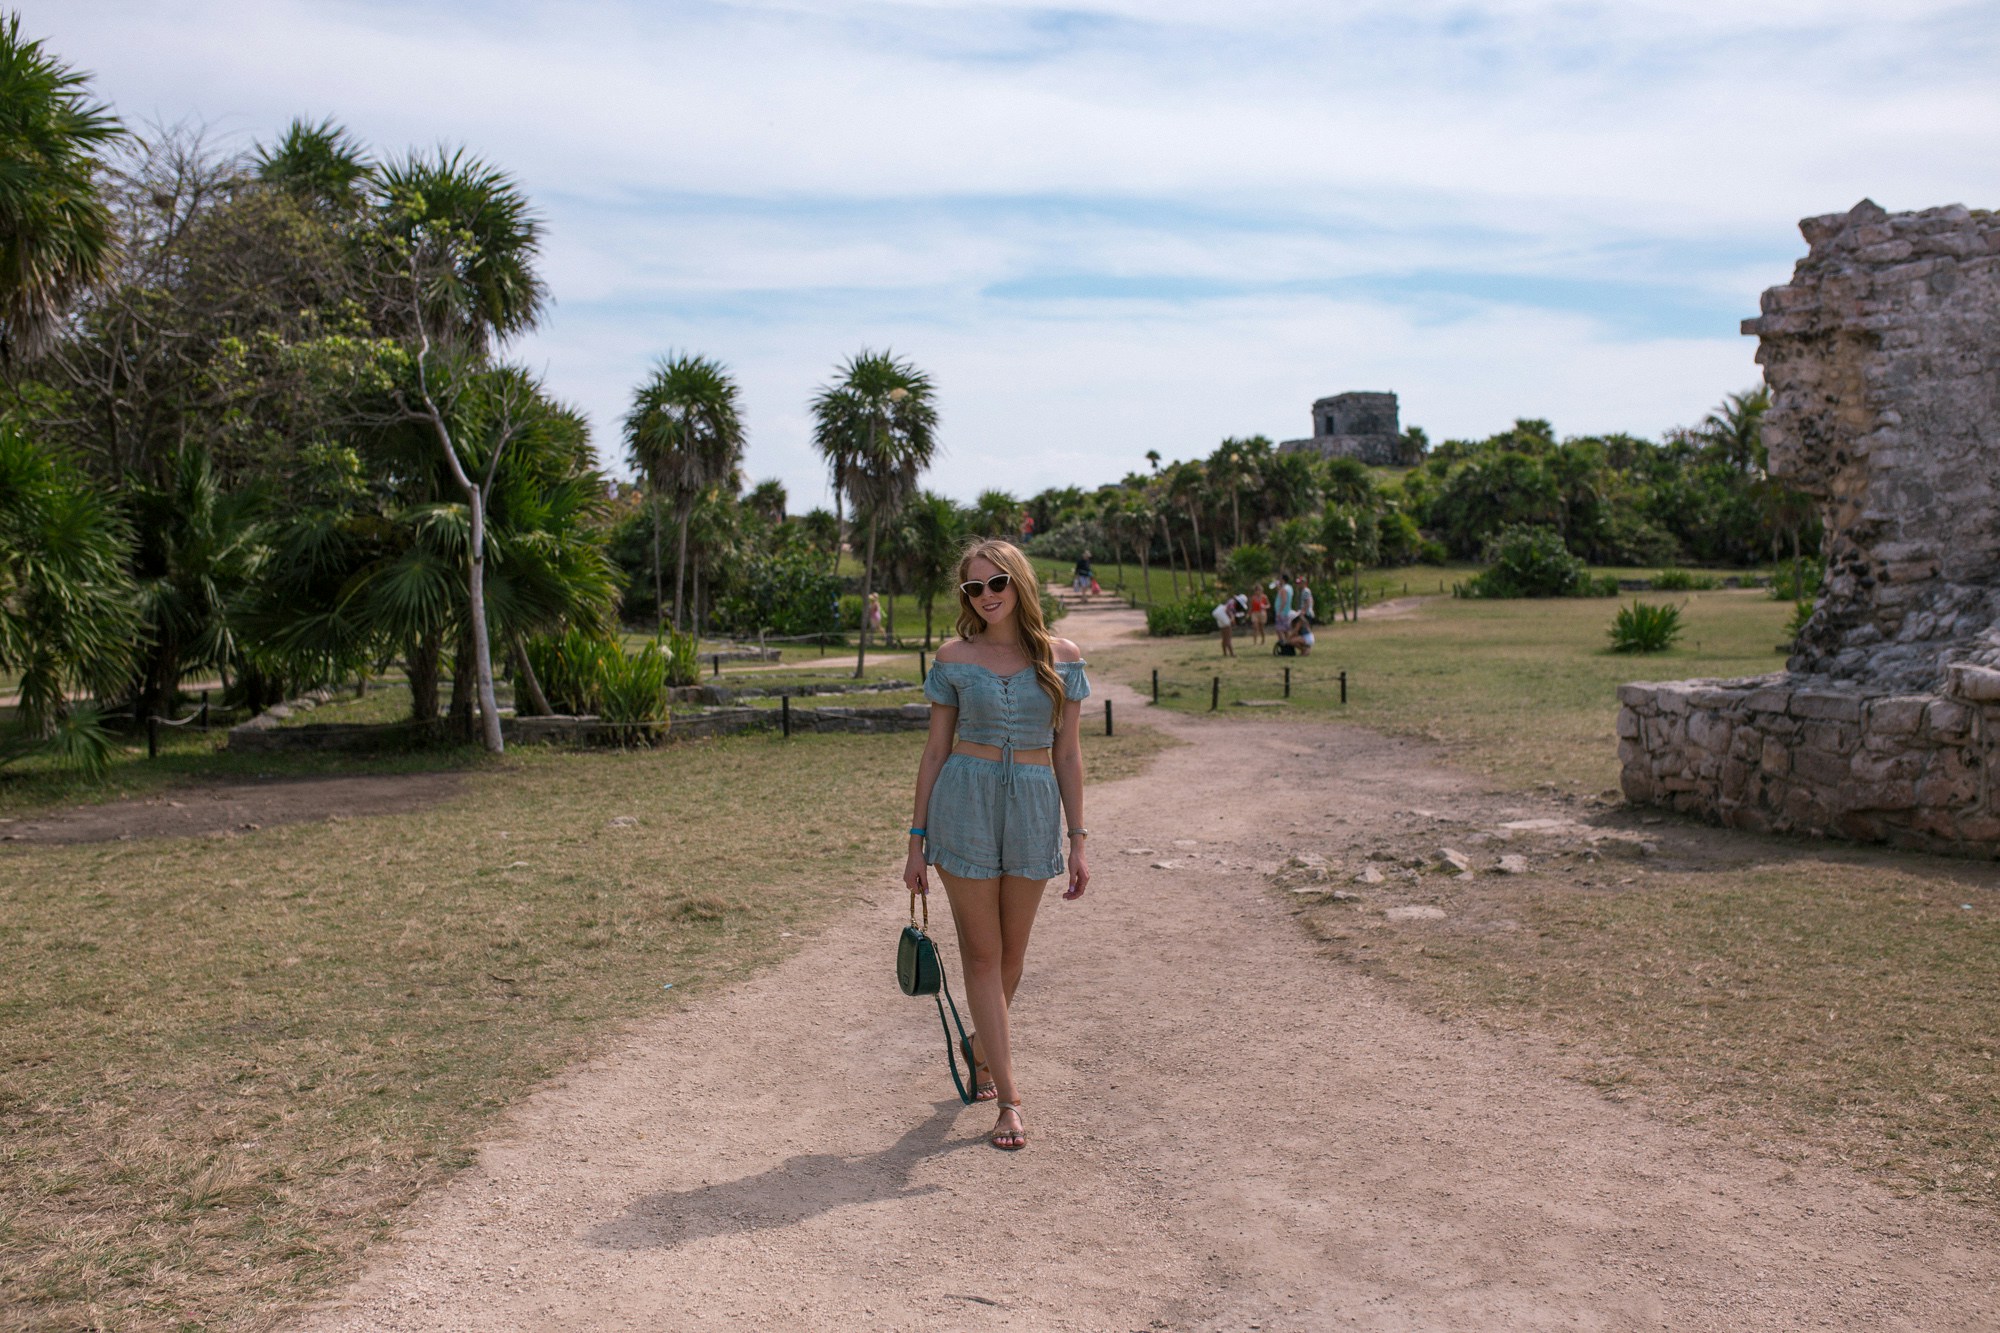 10 Helpful Tips for visiting Tulum - dress light and bring sunscreen, water and a towel. I wore this light two-piece set from Forever 21 and leather sandals to stay cool. 